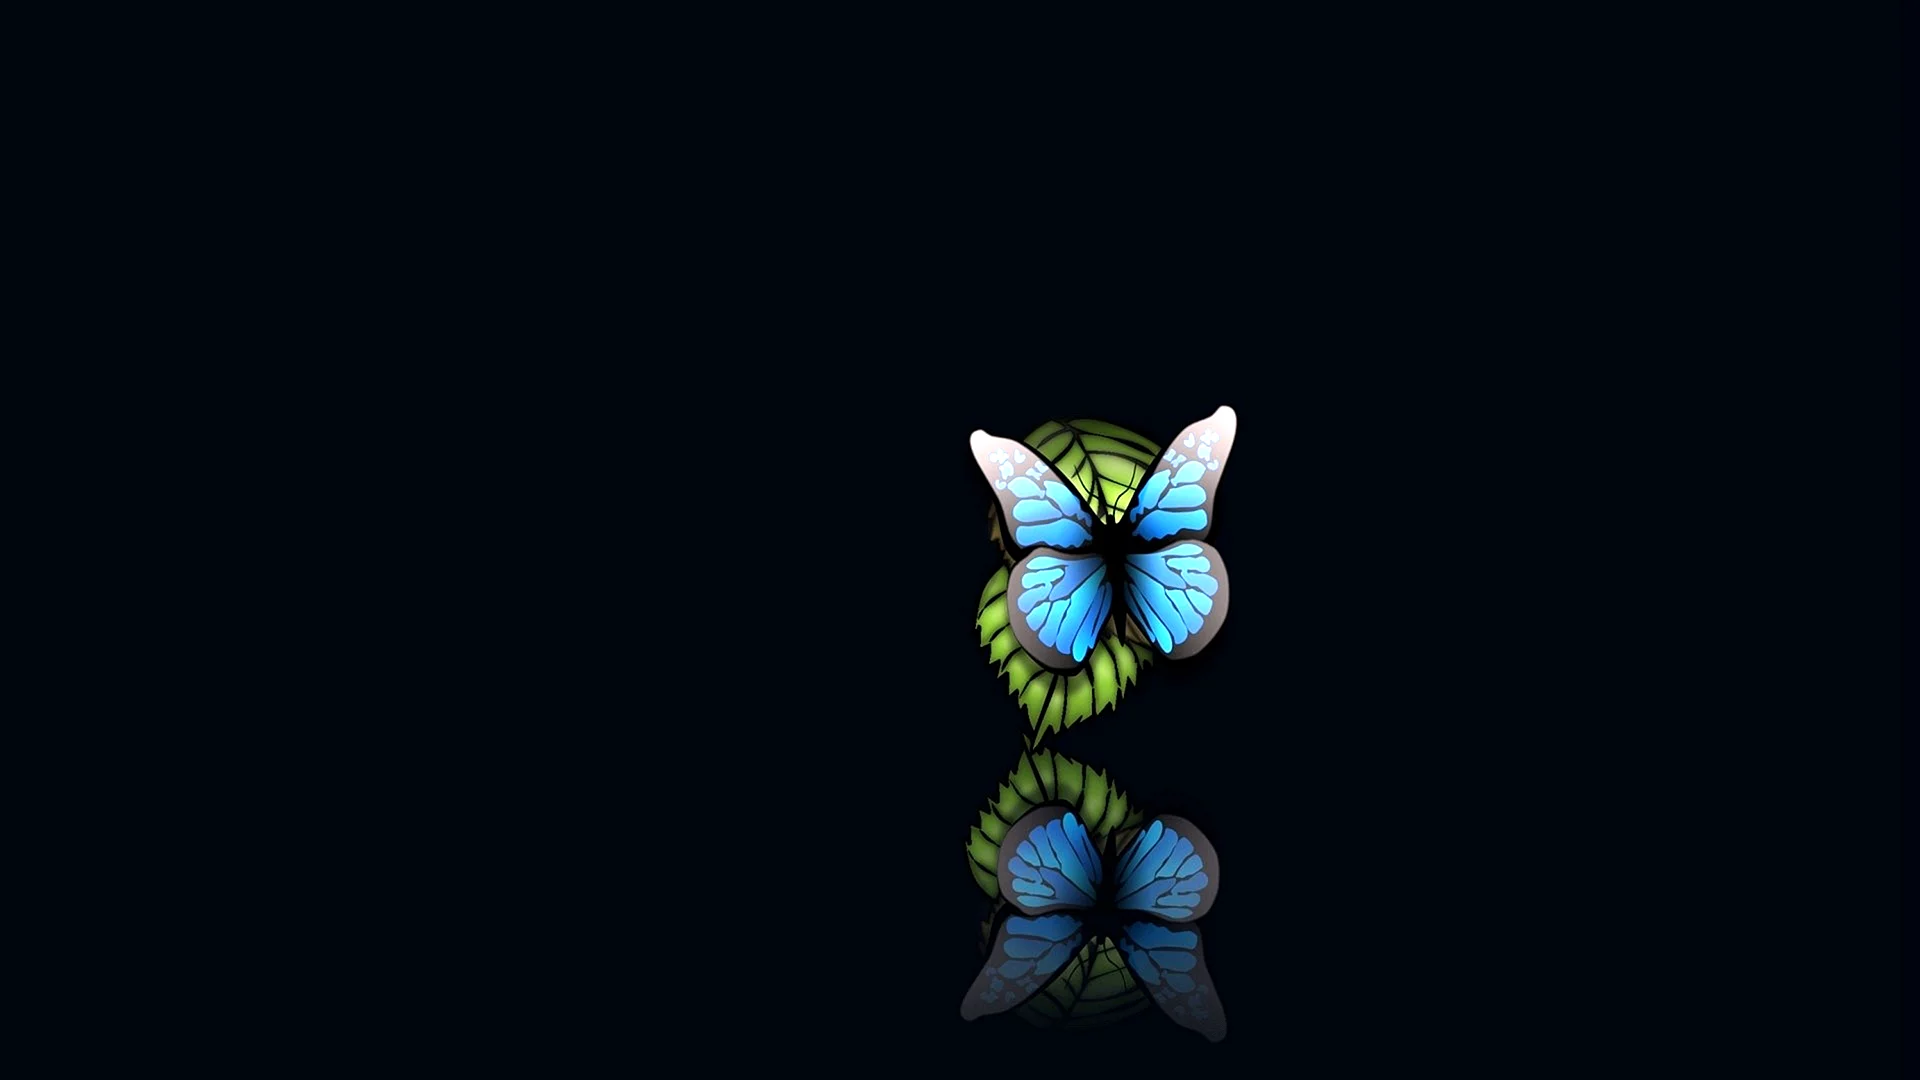 Blue and Black Butterfly Wallpaper